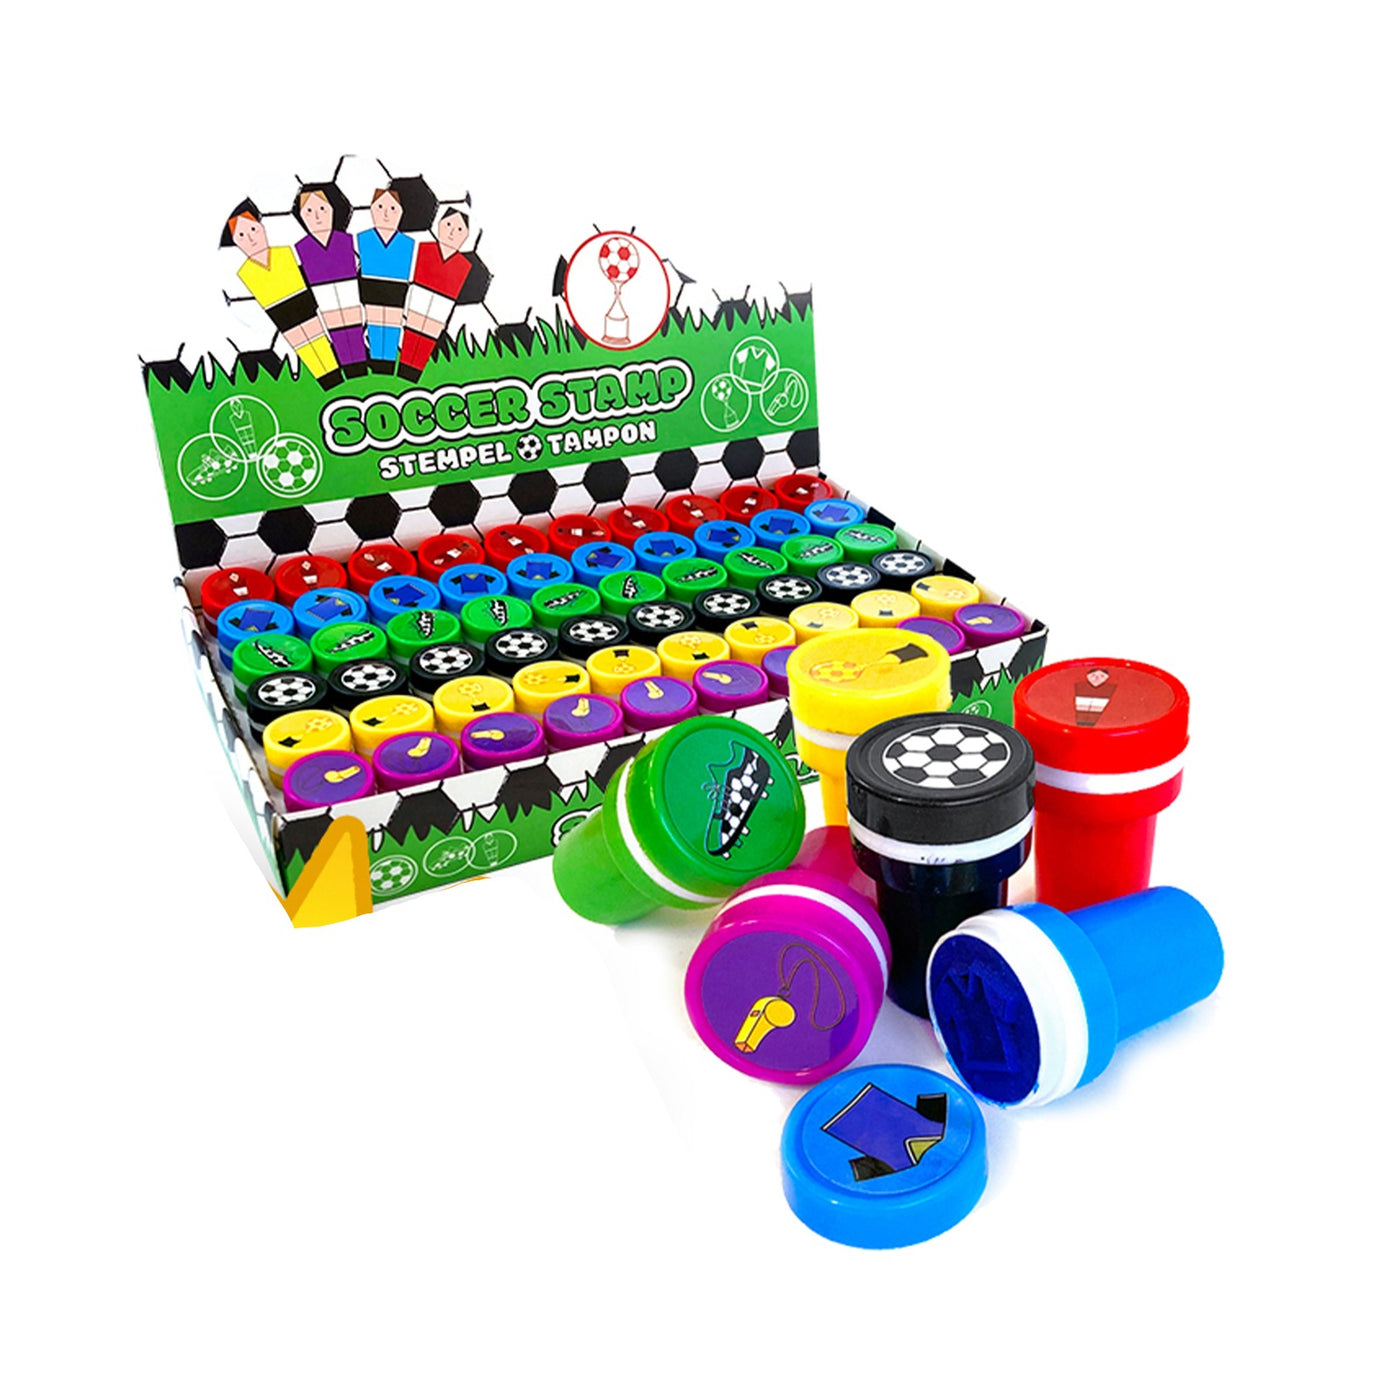 Boys Birthday Football Party Bags With Sweets And Toys